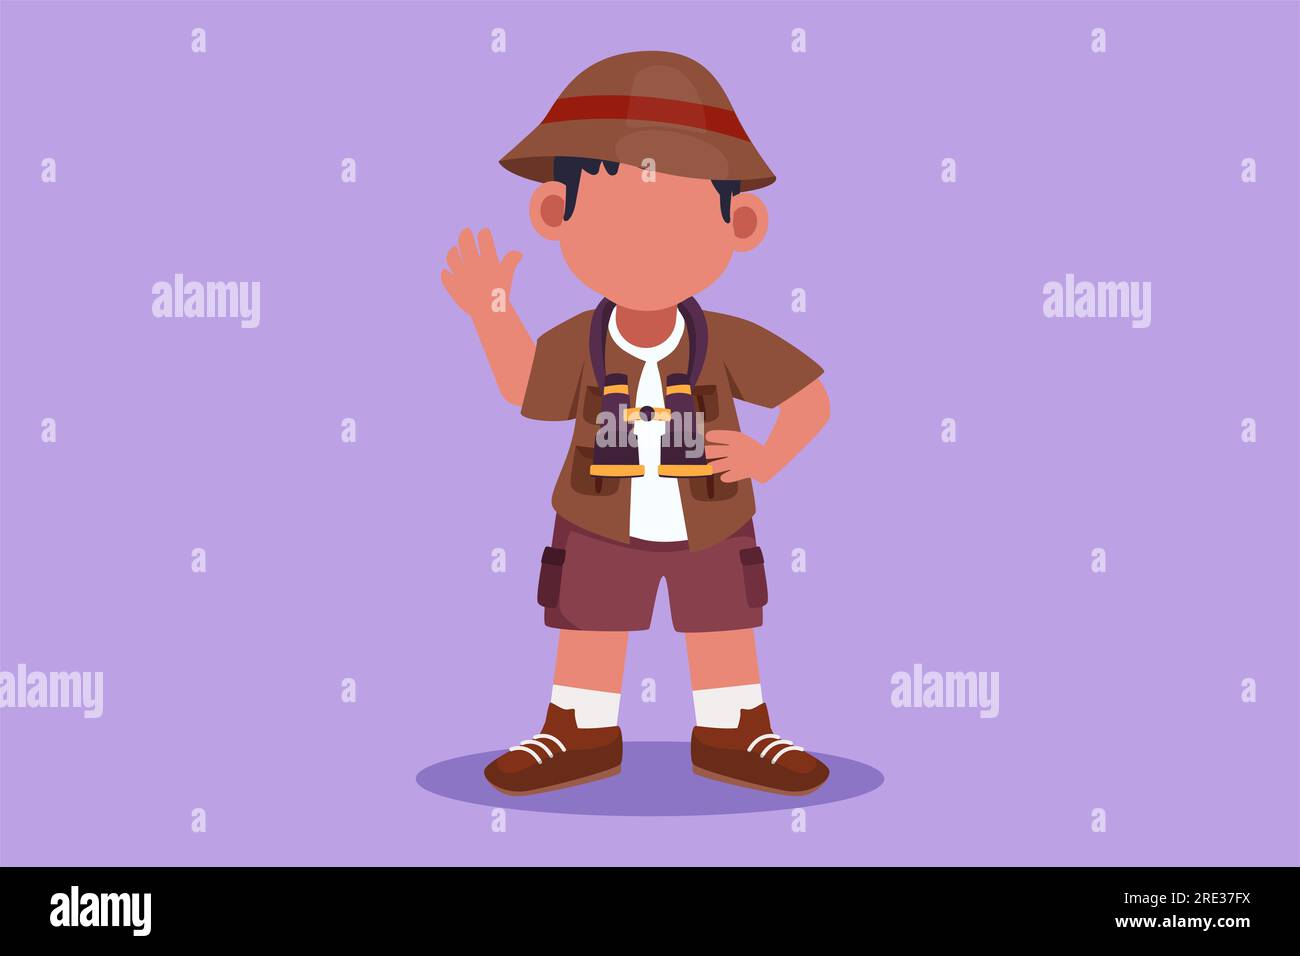 Graphic flat design drawing little boy scout wearing safari outfit complete with hat, carrying bag and draping binoculars. Adorable kid adventurer lea Stock Photo